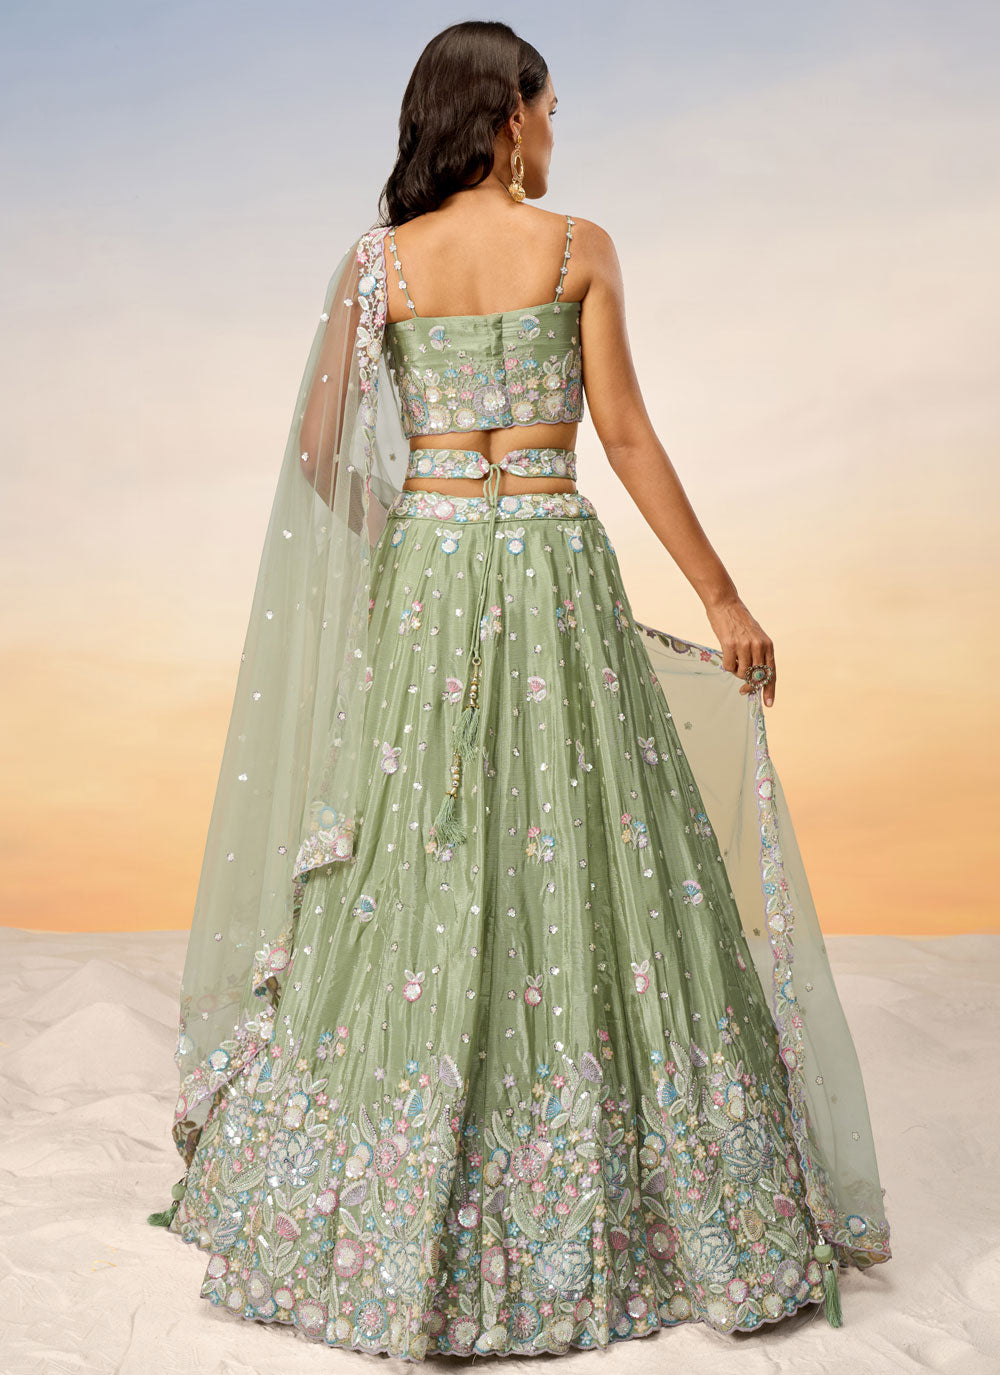 Fetching Green Chiffon Lehenga Choli With Embroidered And Sequins Work